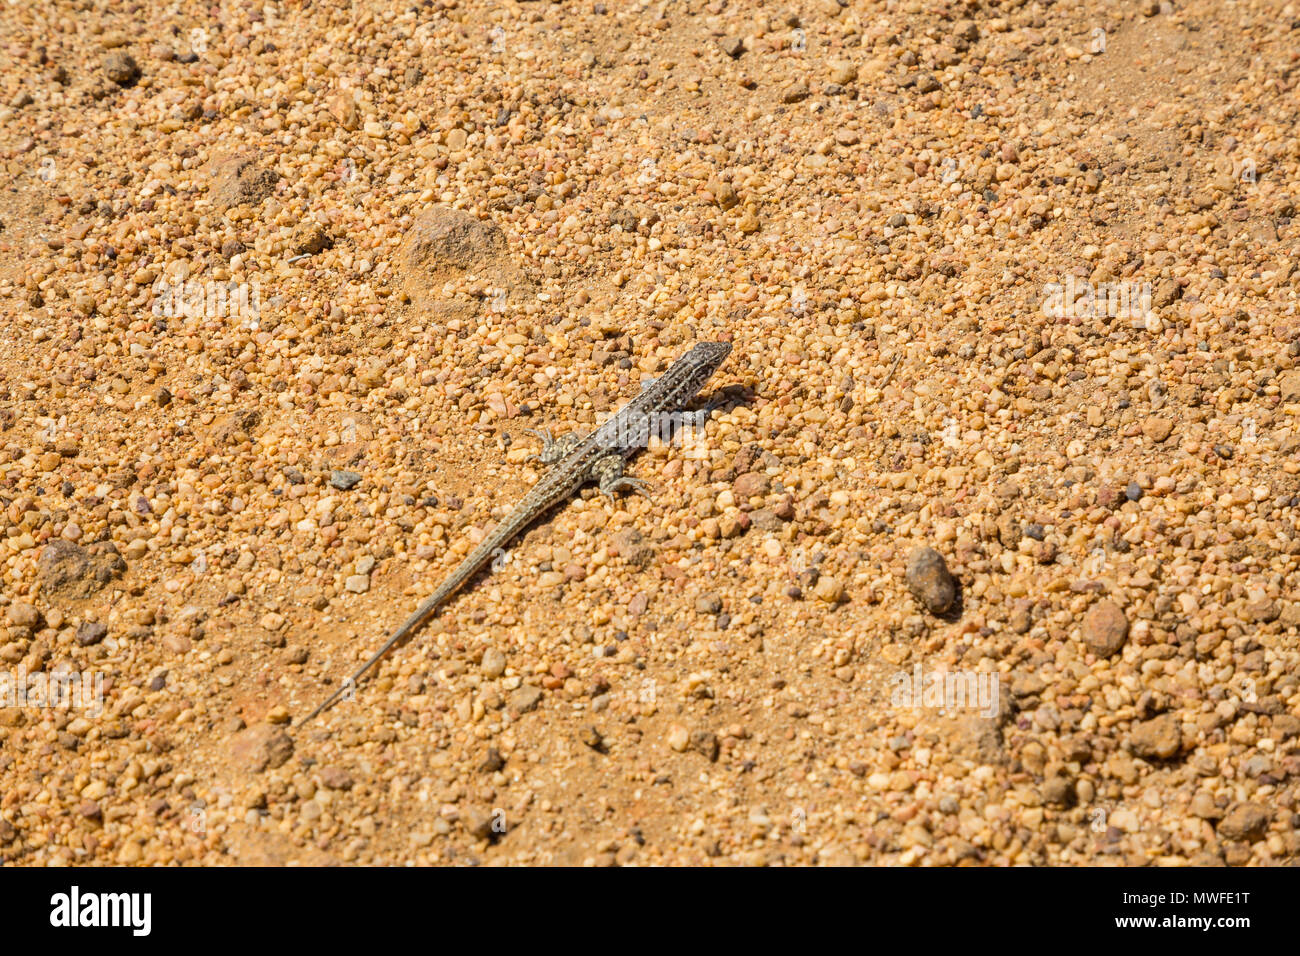 Spotted lizard on gravel Stock Photo